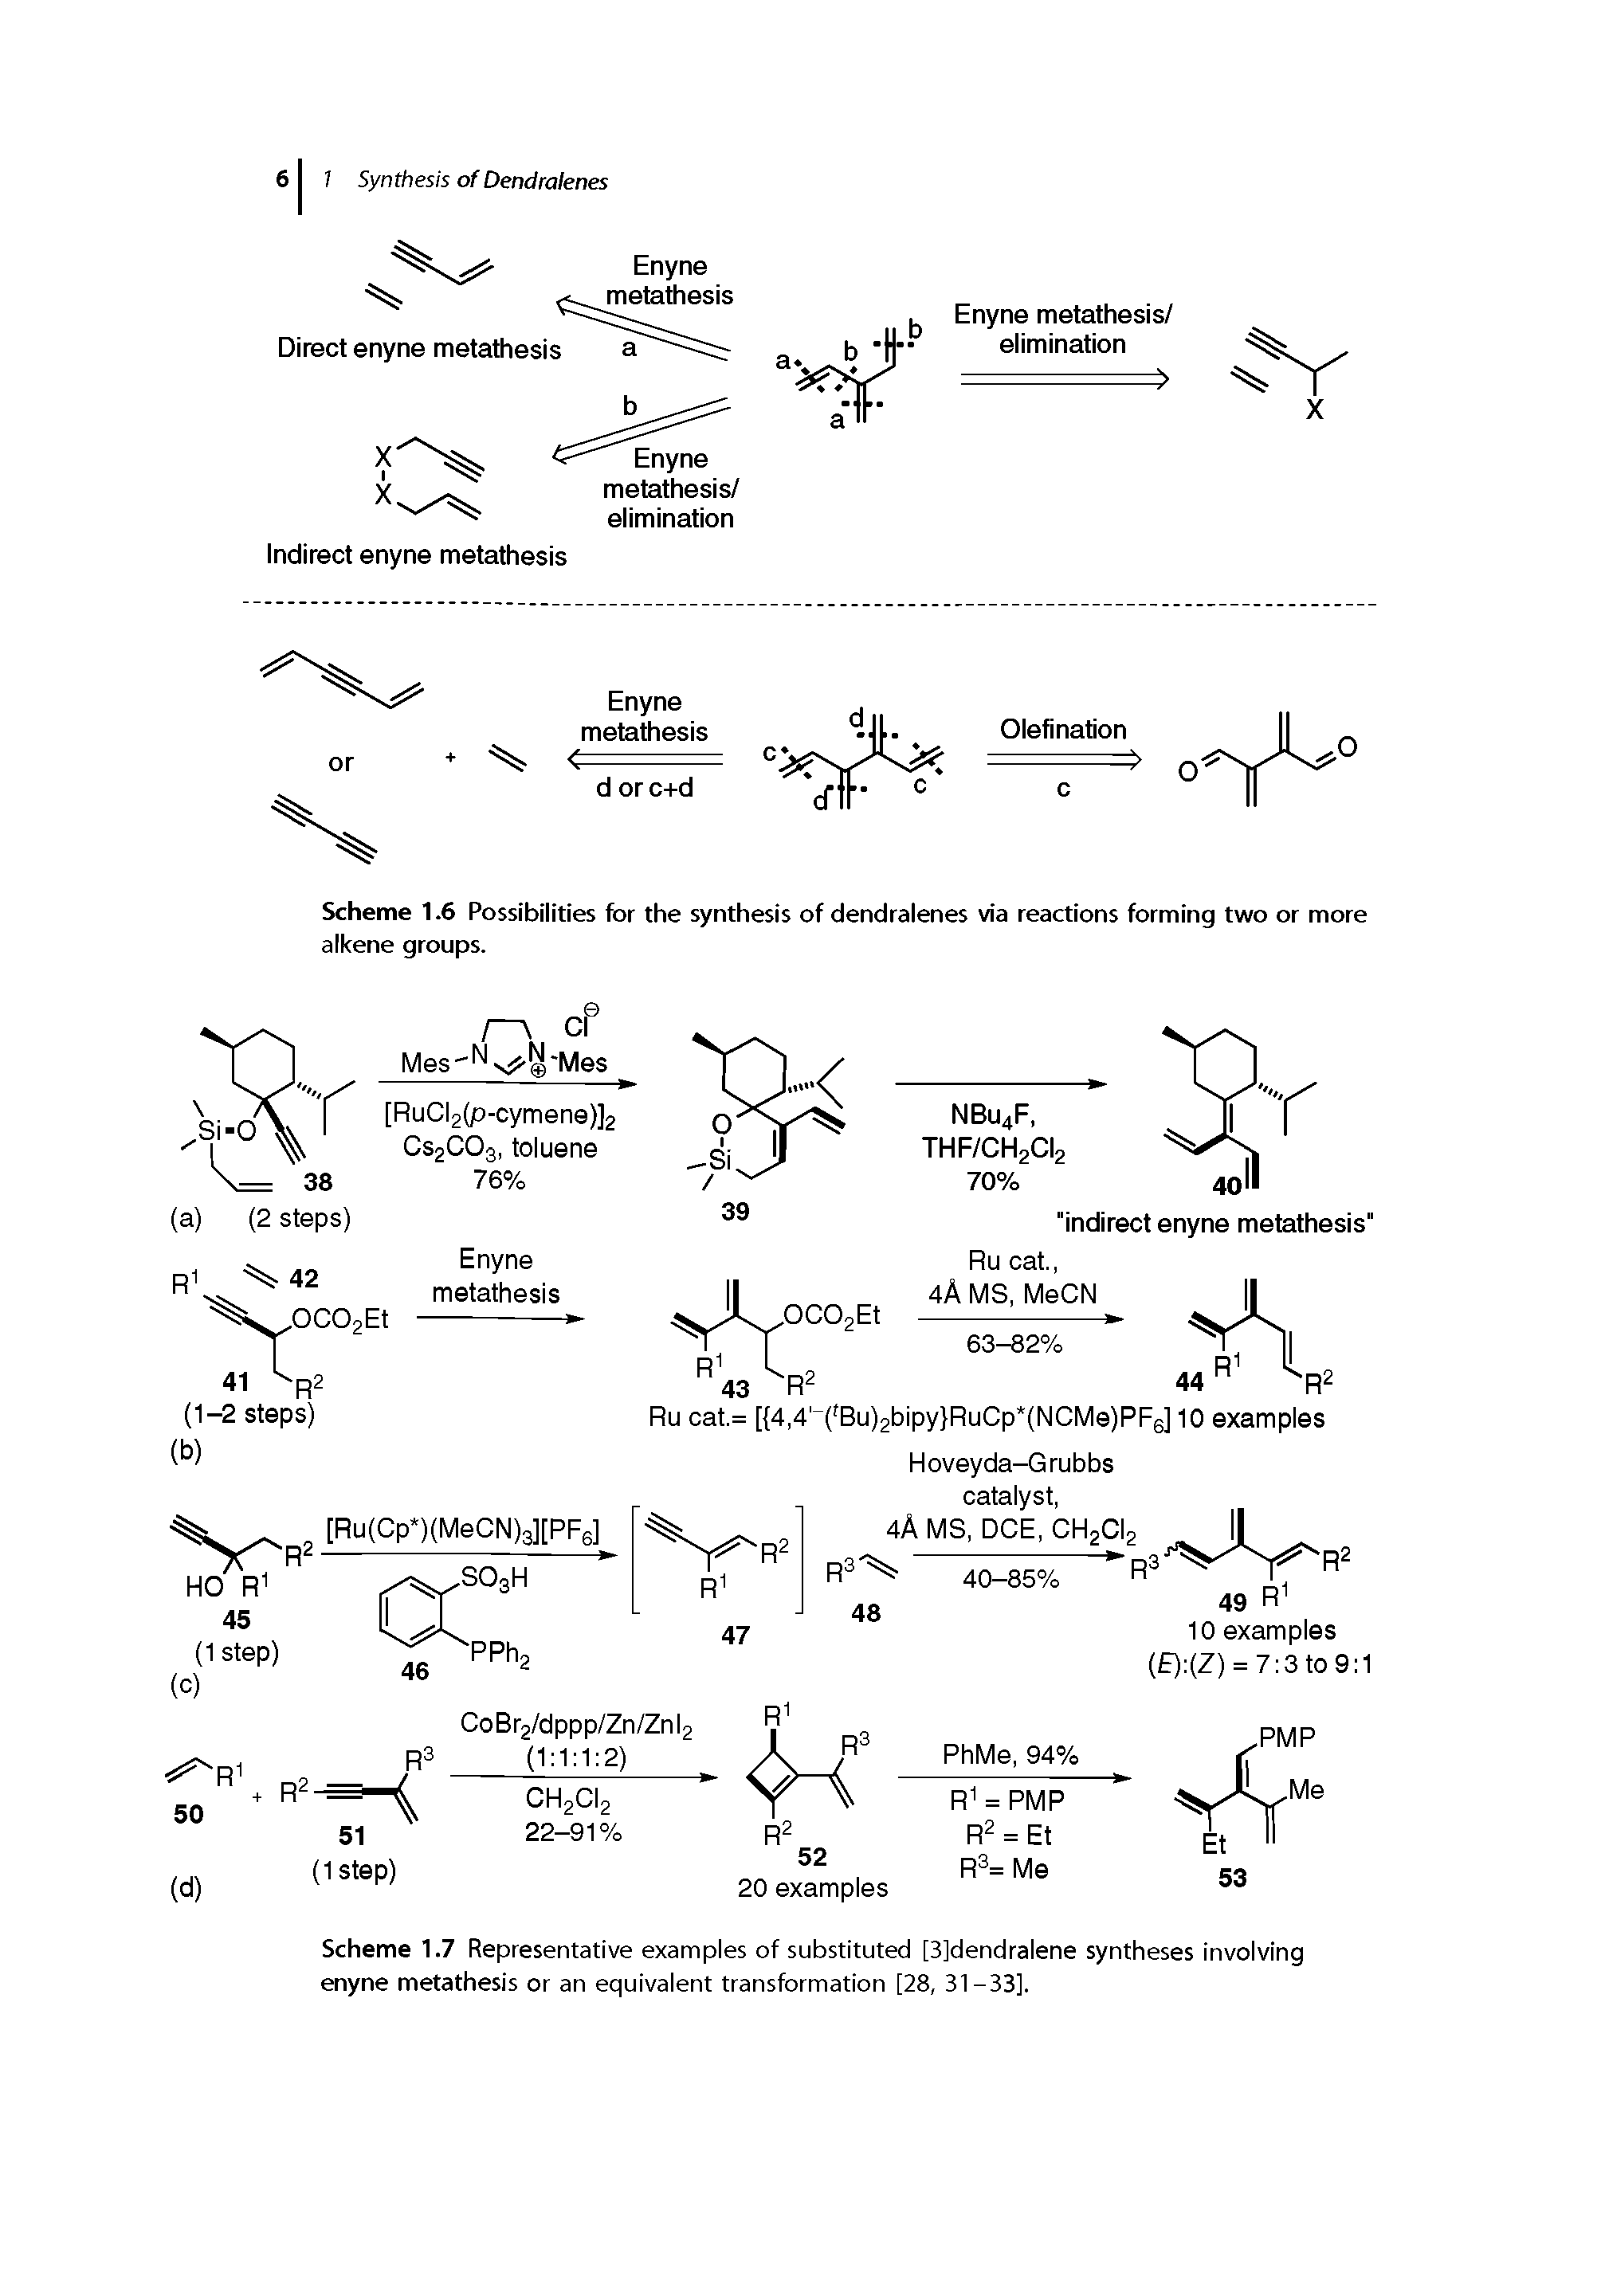 Scheme 1.6 Possibilities for the synthesis of dendralenes via reactions forming two or more alkene groups.